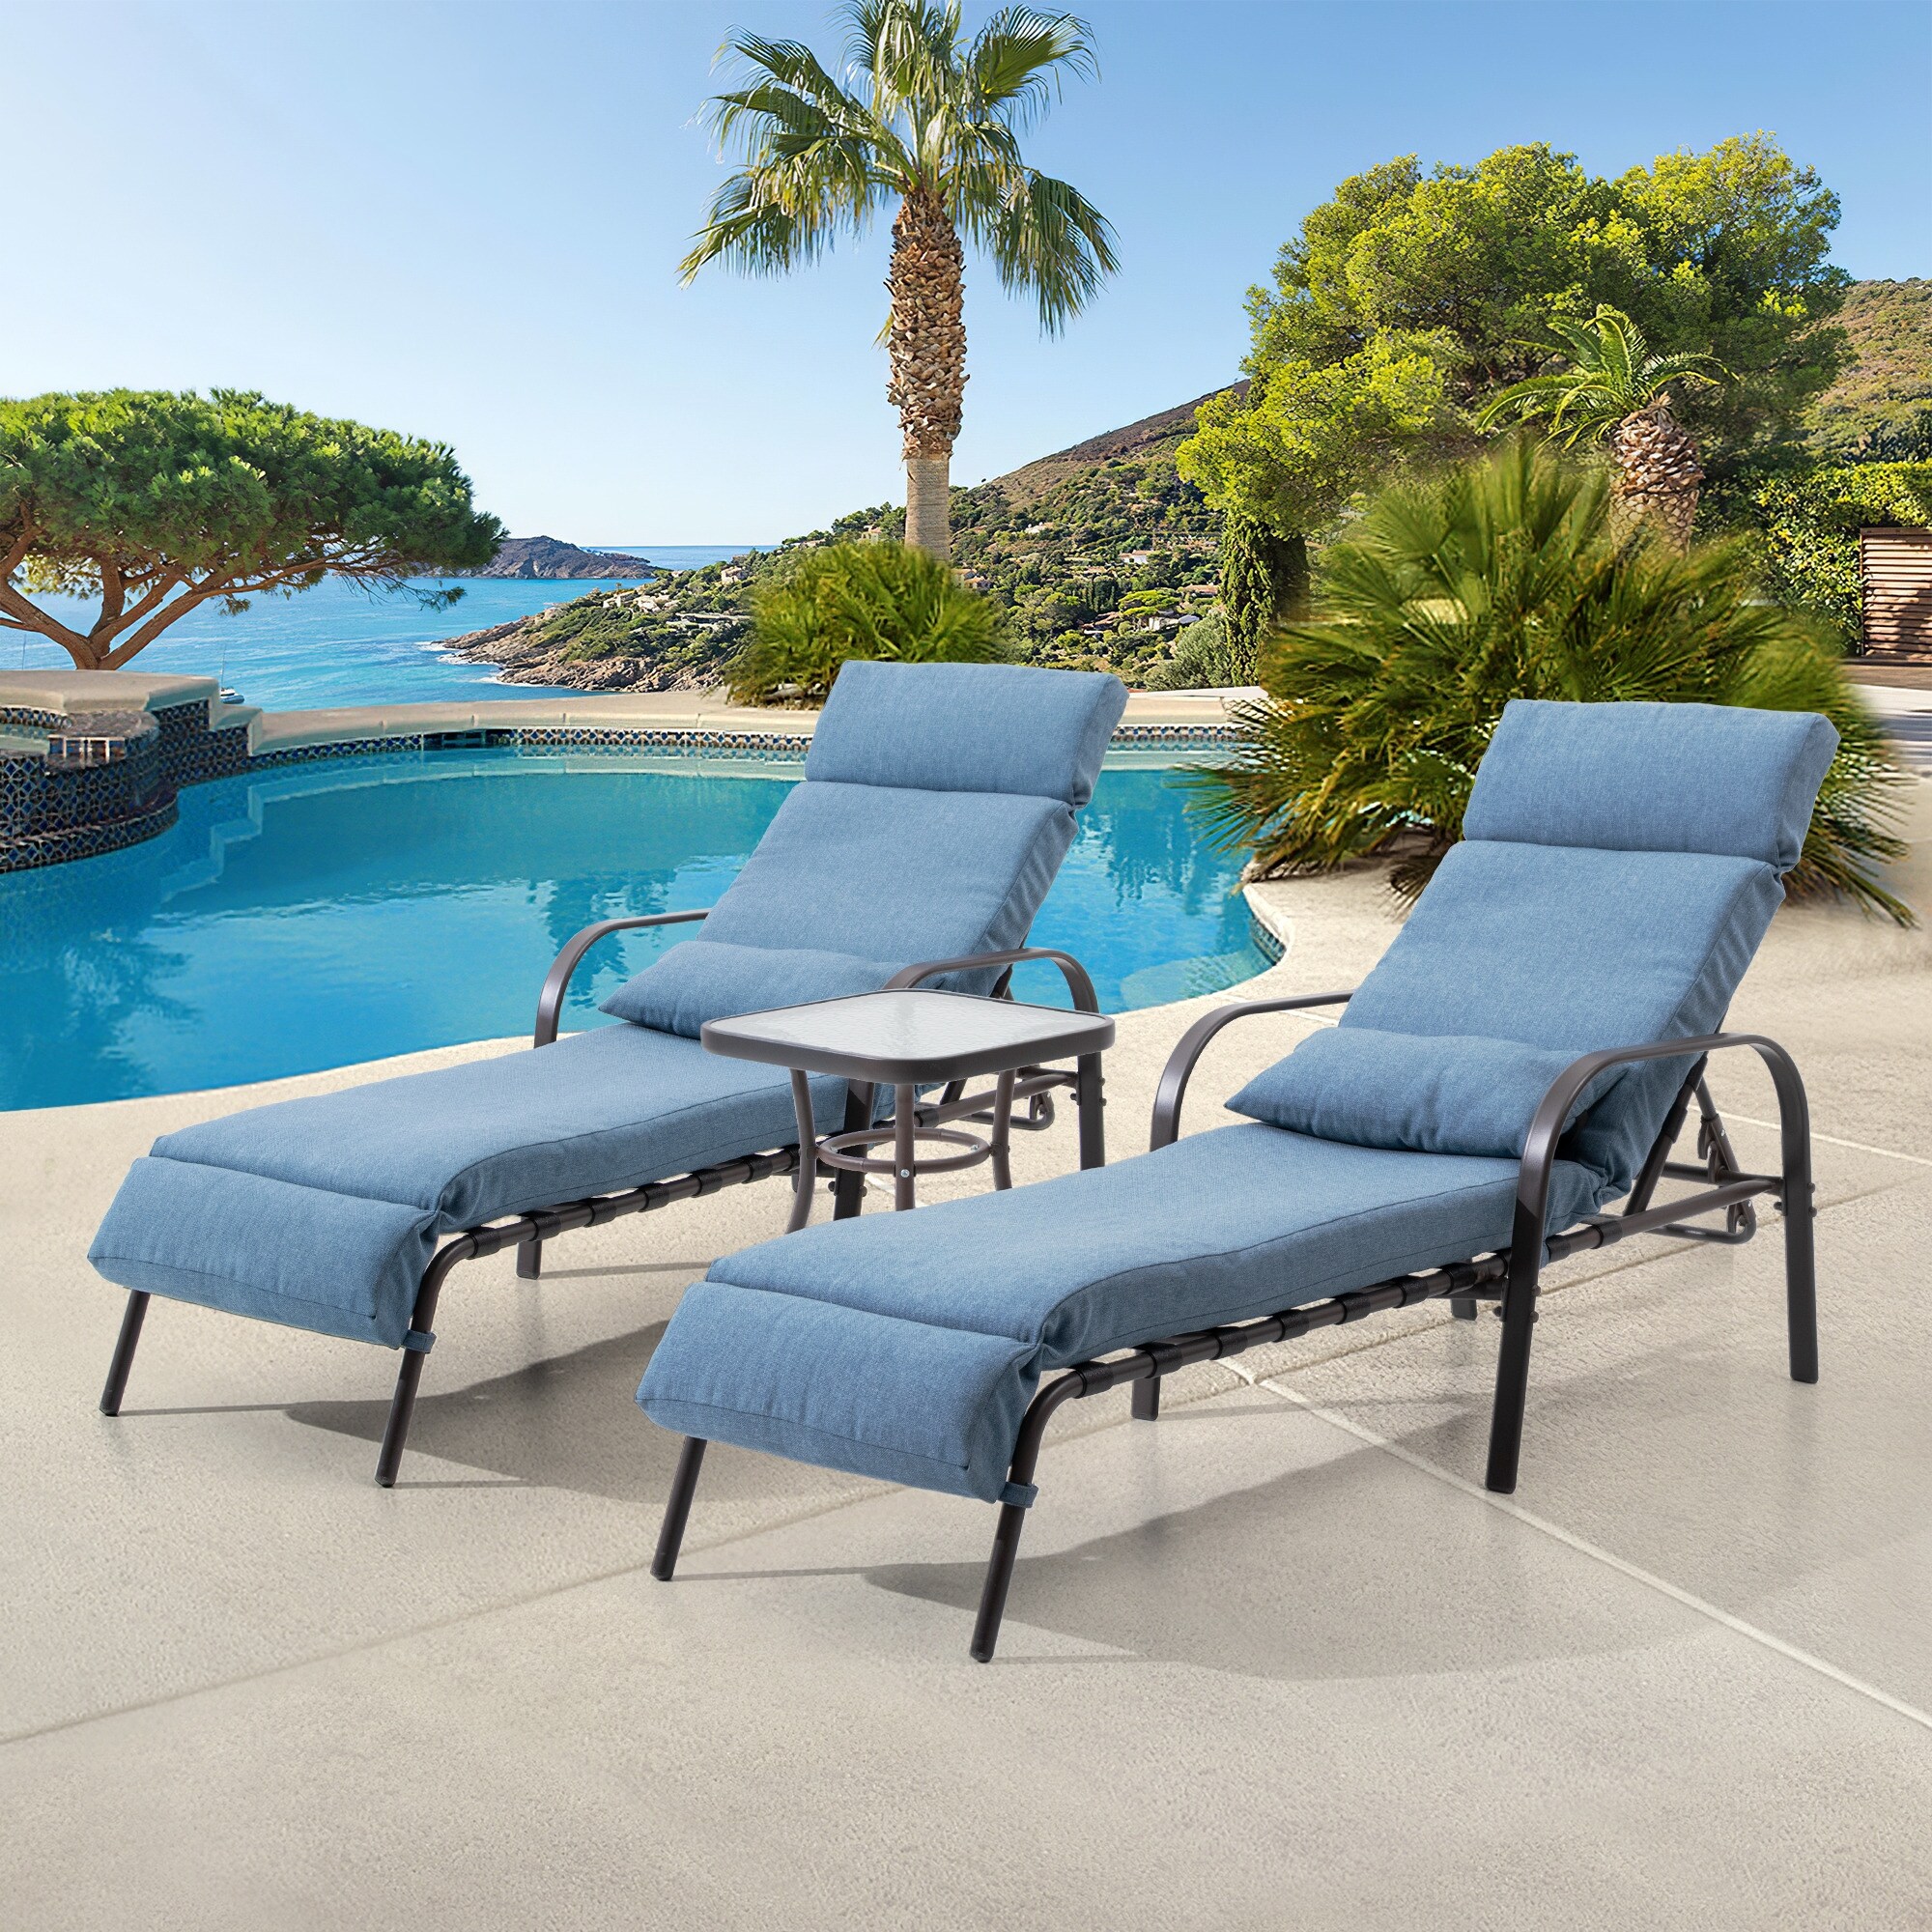 Pellebant 3pcs Adjustable Patio Chaise Lounge With Cushion and Pillow and Table - N/a